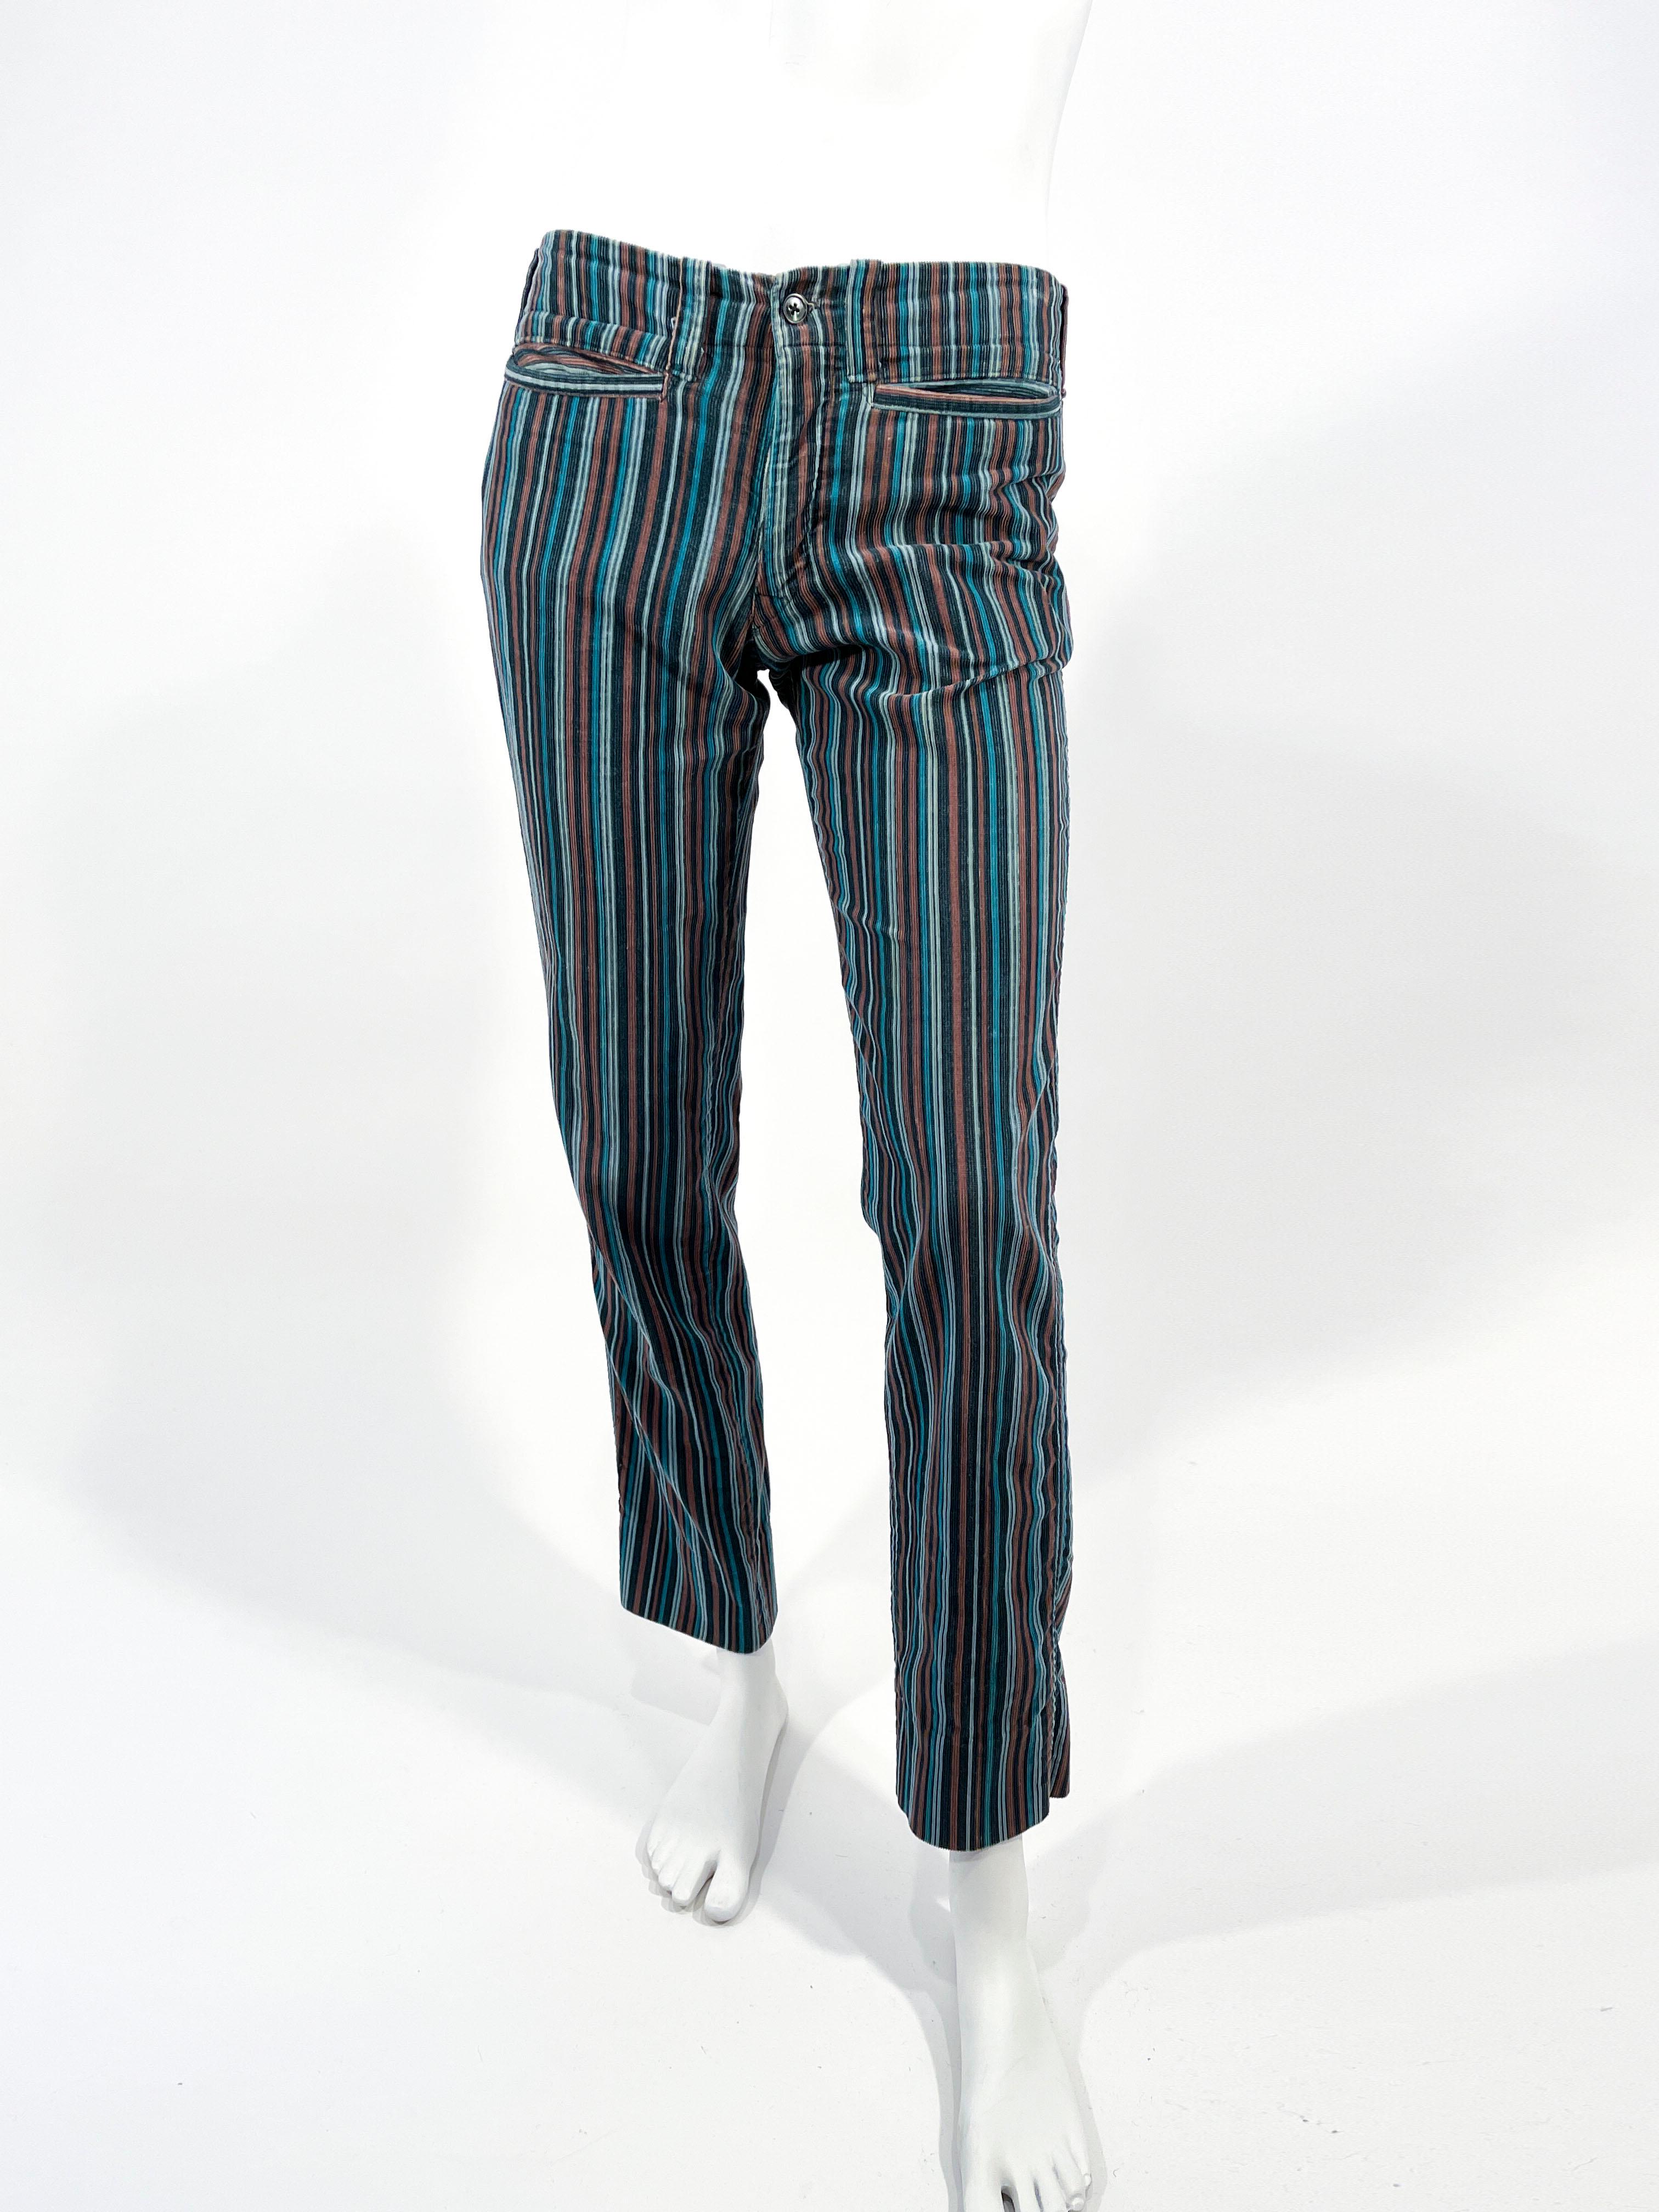 1979 Andrew Yiannakou Corduroy Stripped Pants    In Good Condition For Sale In San Francisco, CA